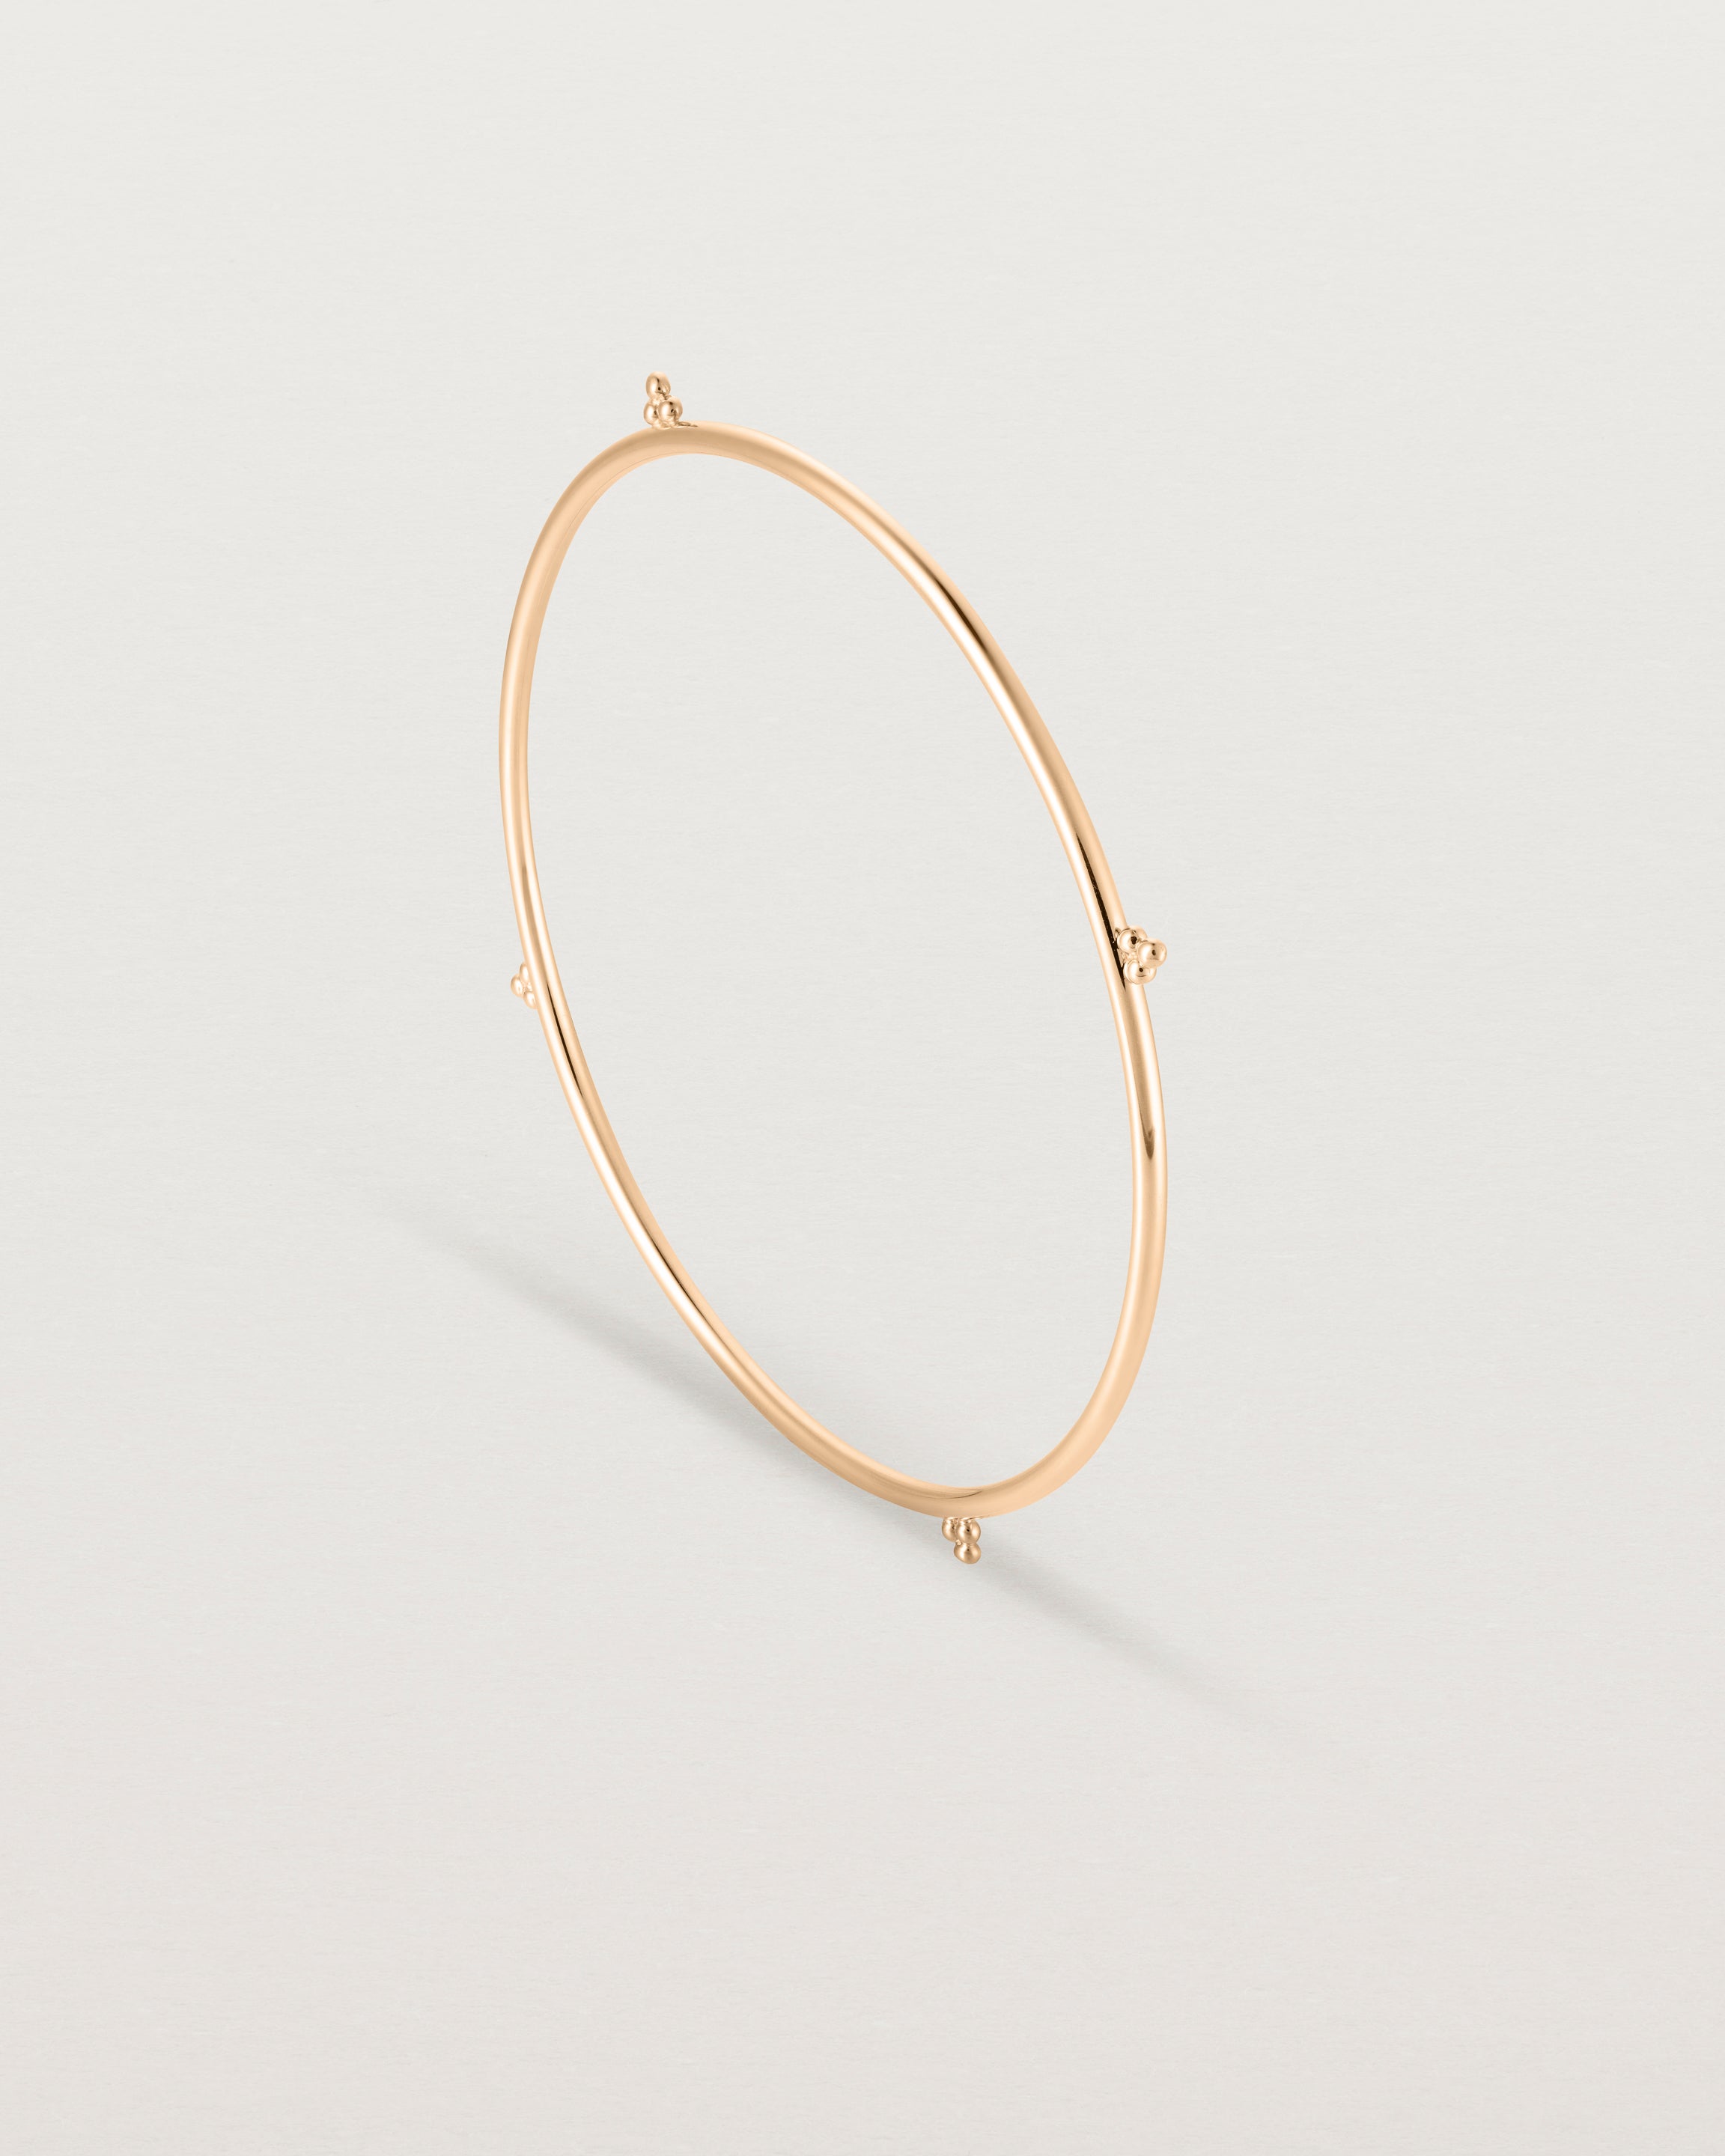 Standing view of the Alya Bangle in Rose Gold.